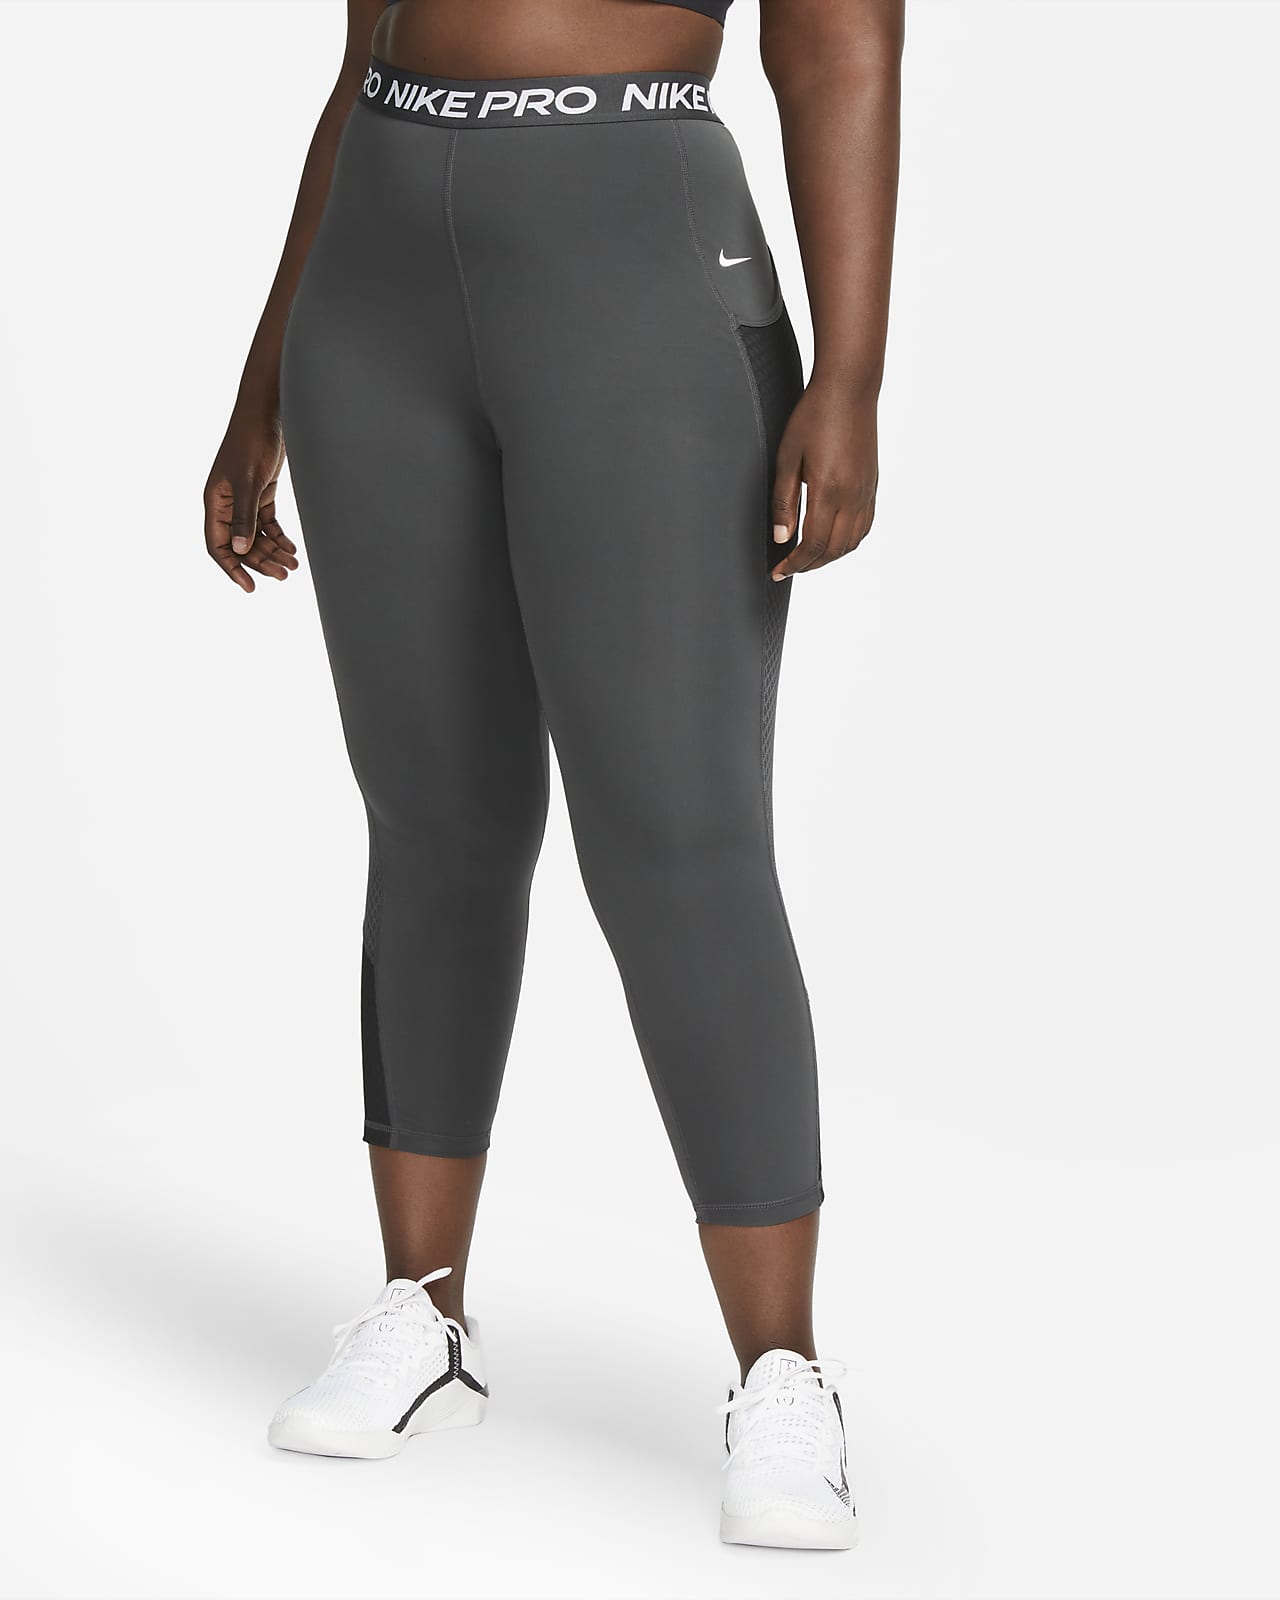 Bedenk Trend kader Nike Pro Women's High-Waisted 7/8 Leggings with Pockets (Plus Size). Nike .com